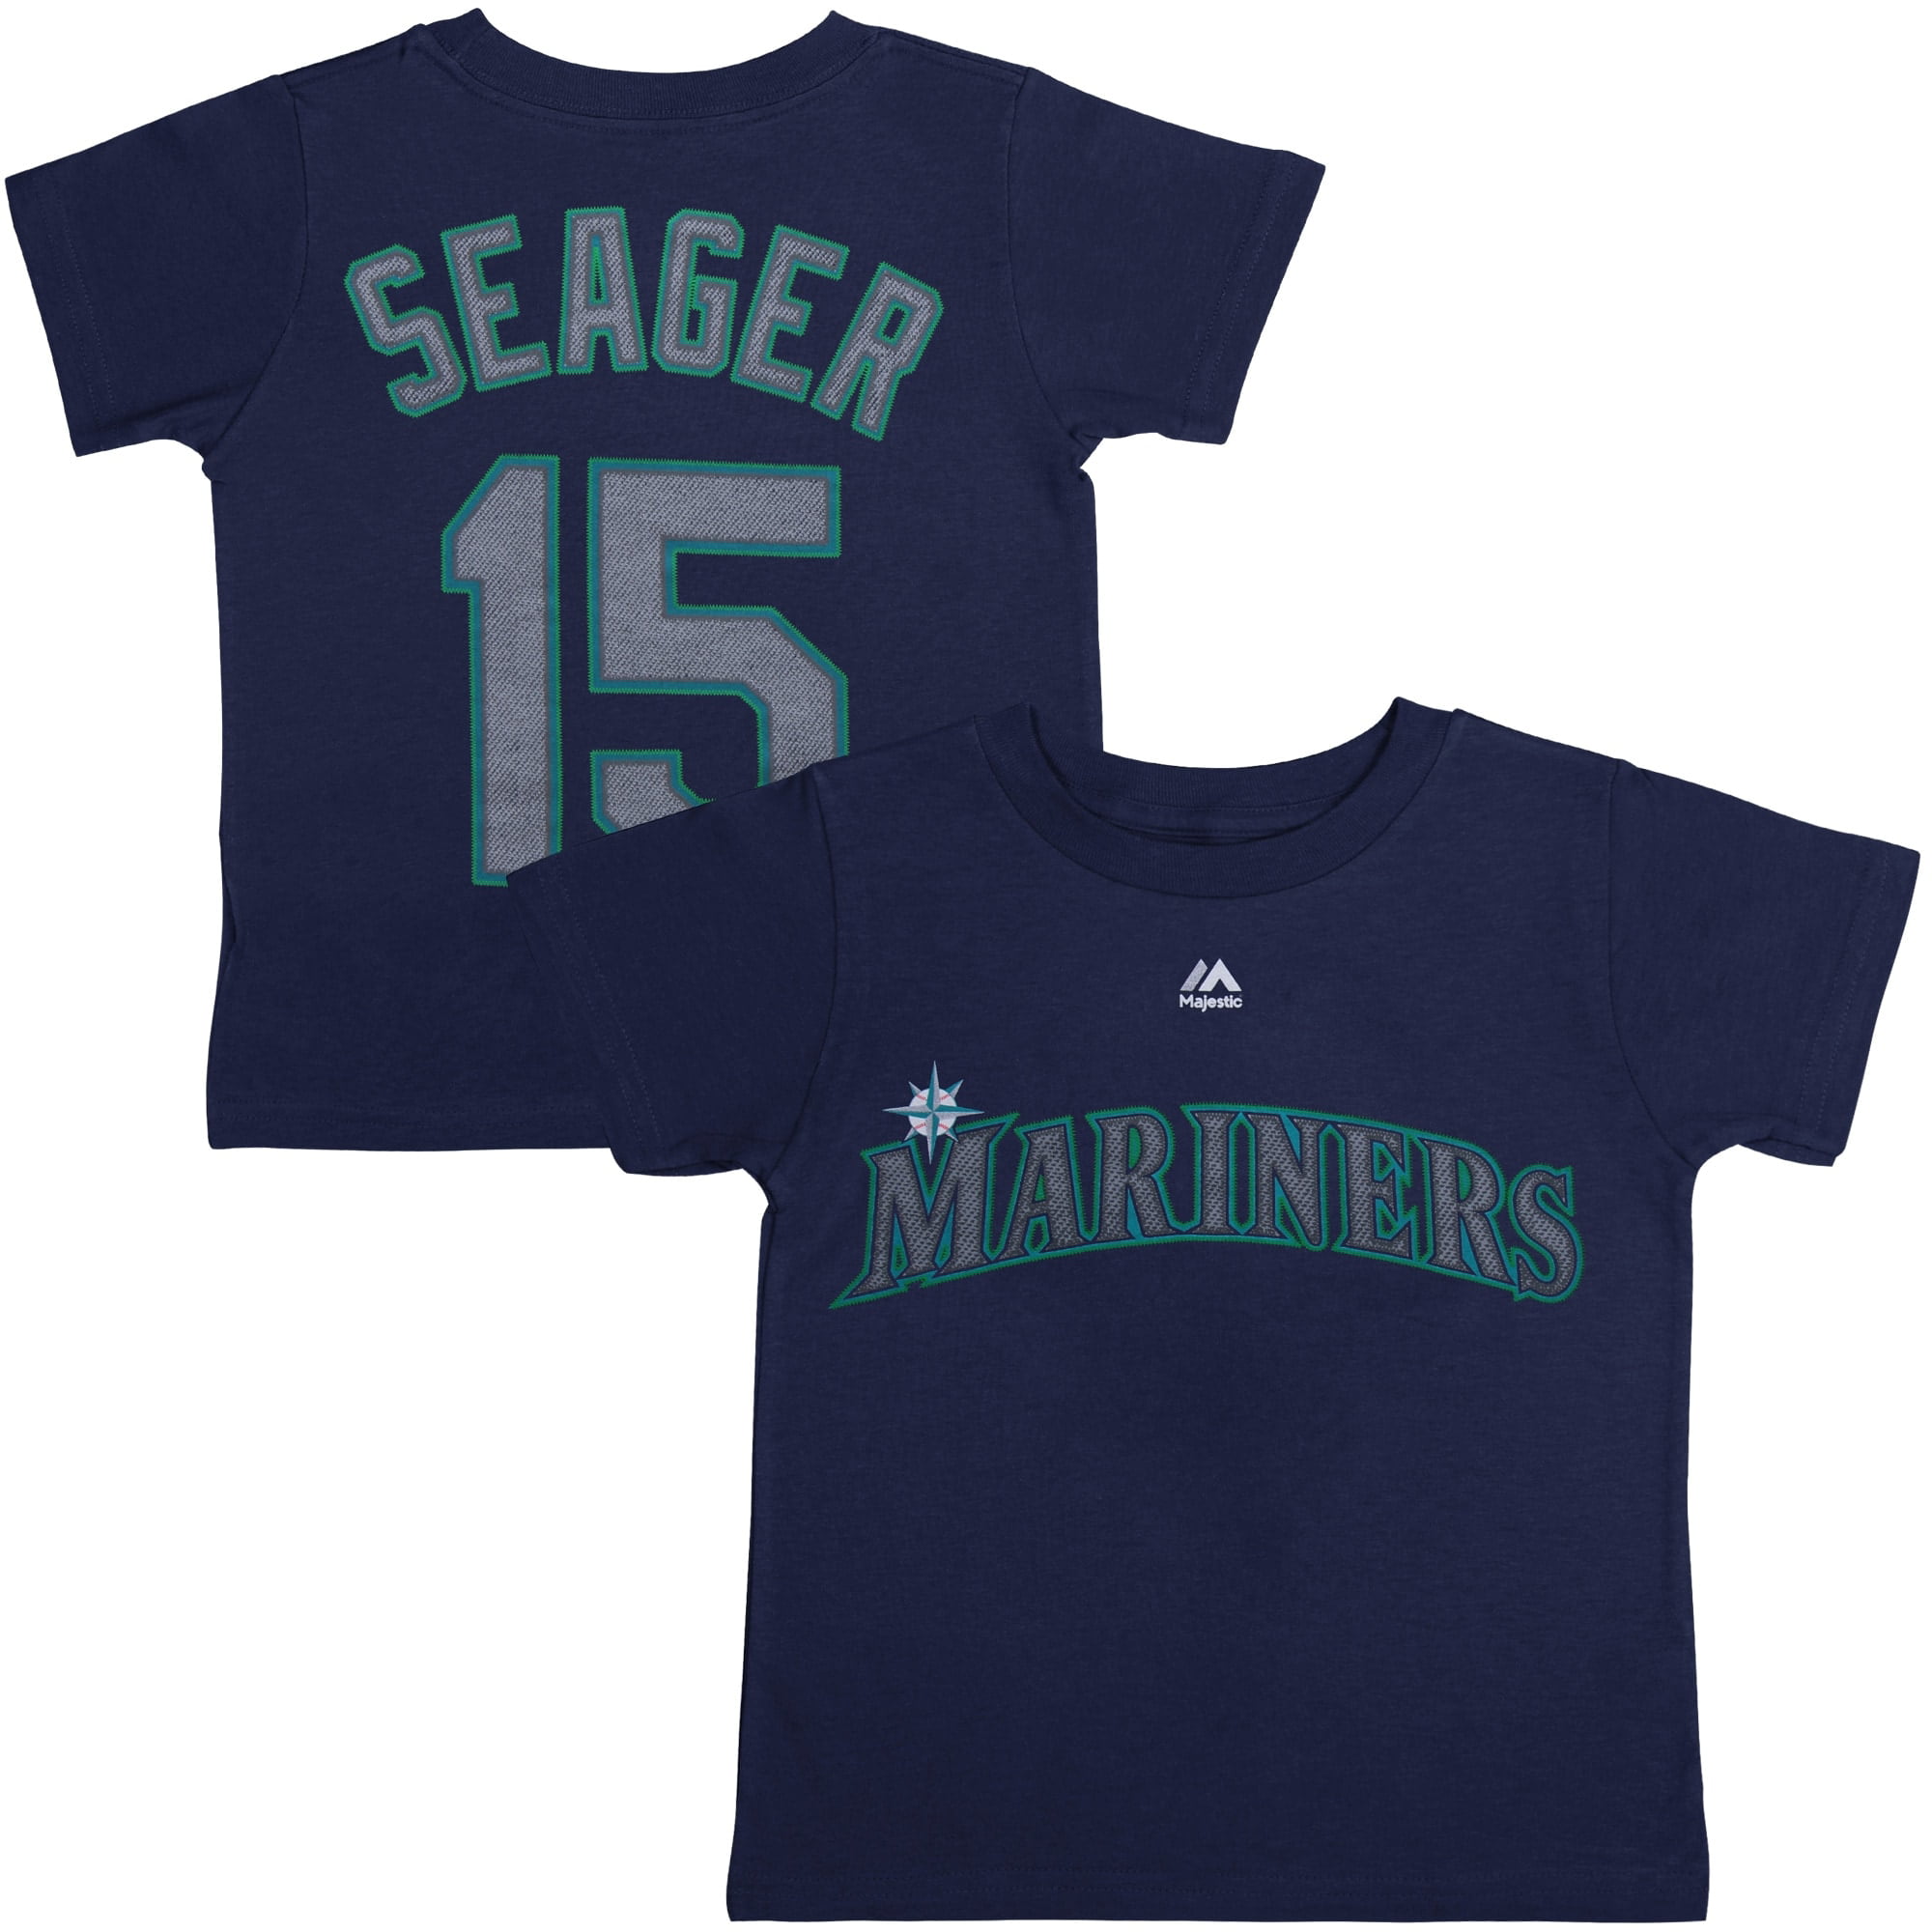 kyle seager youth jersey